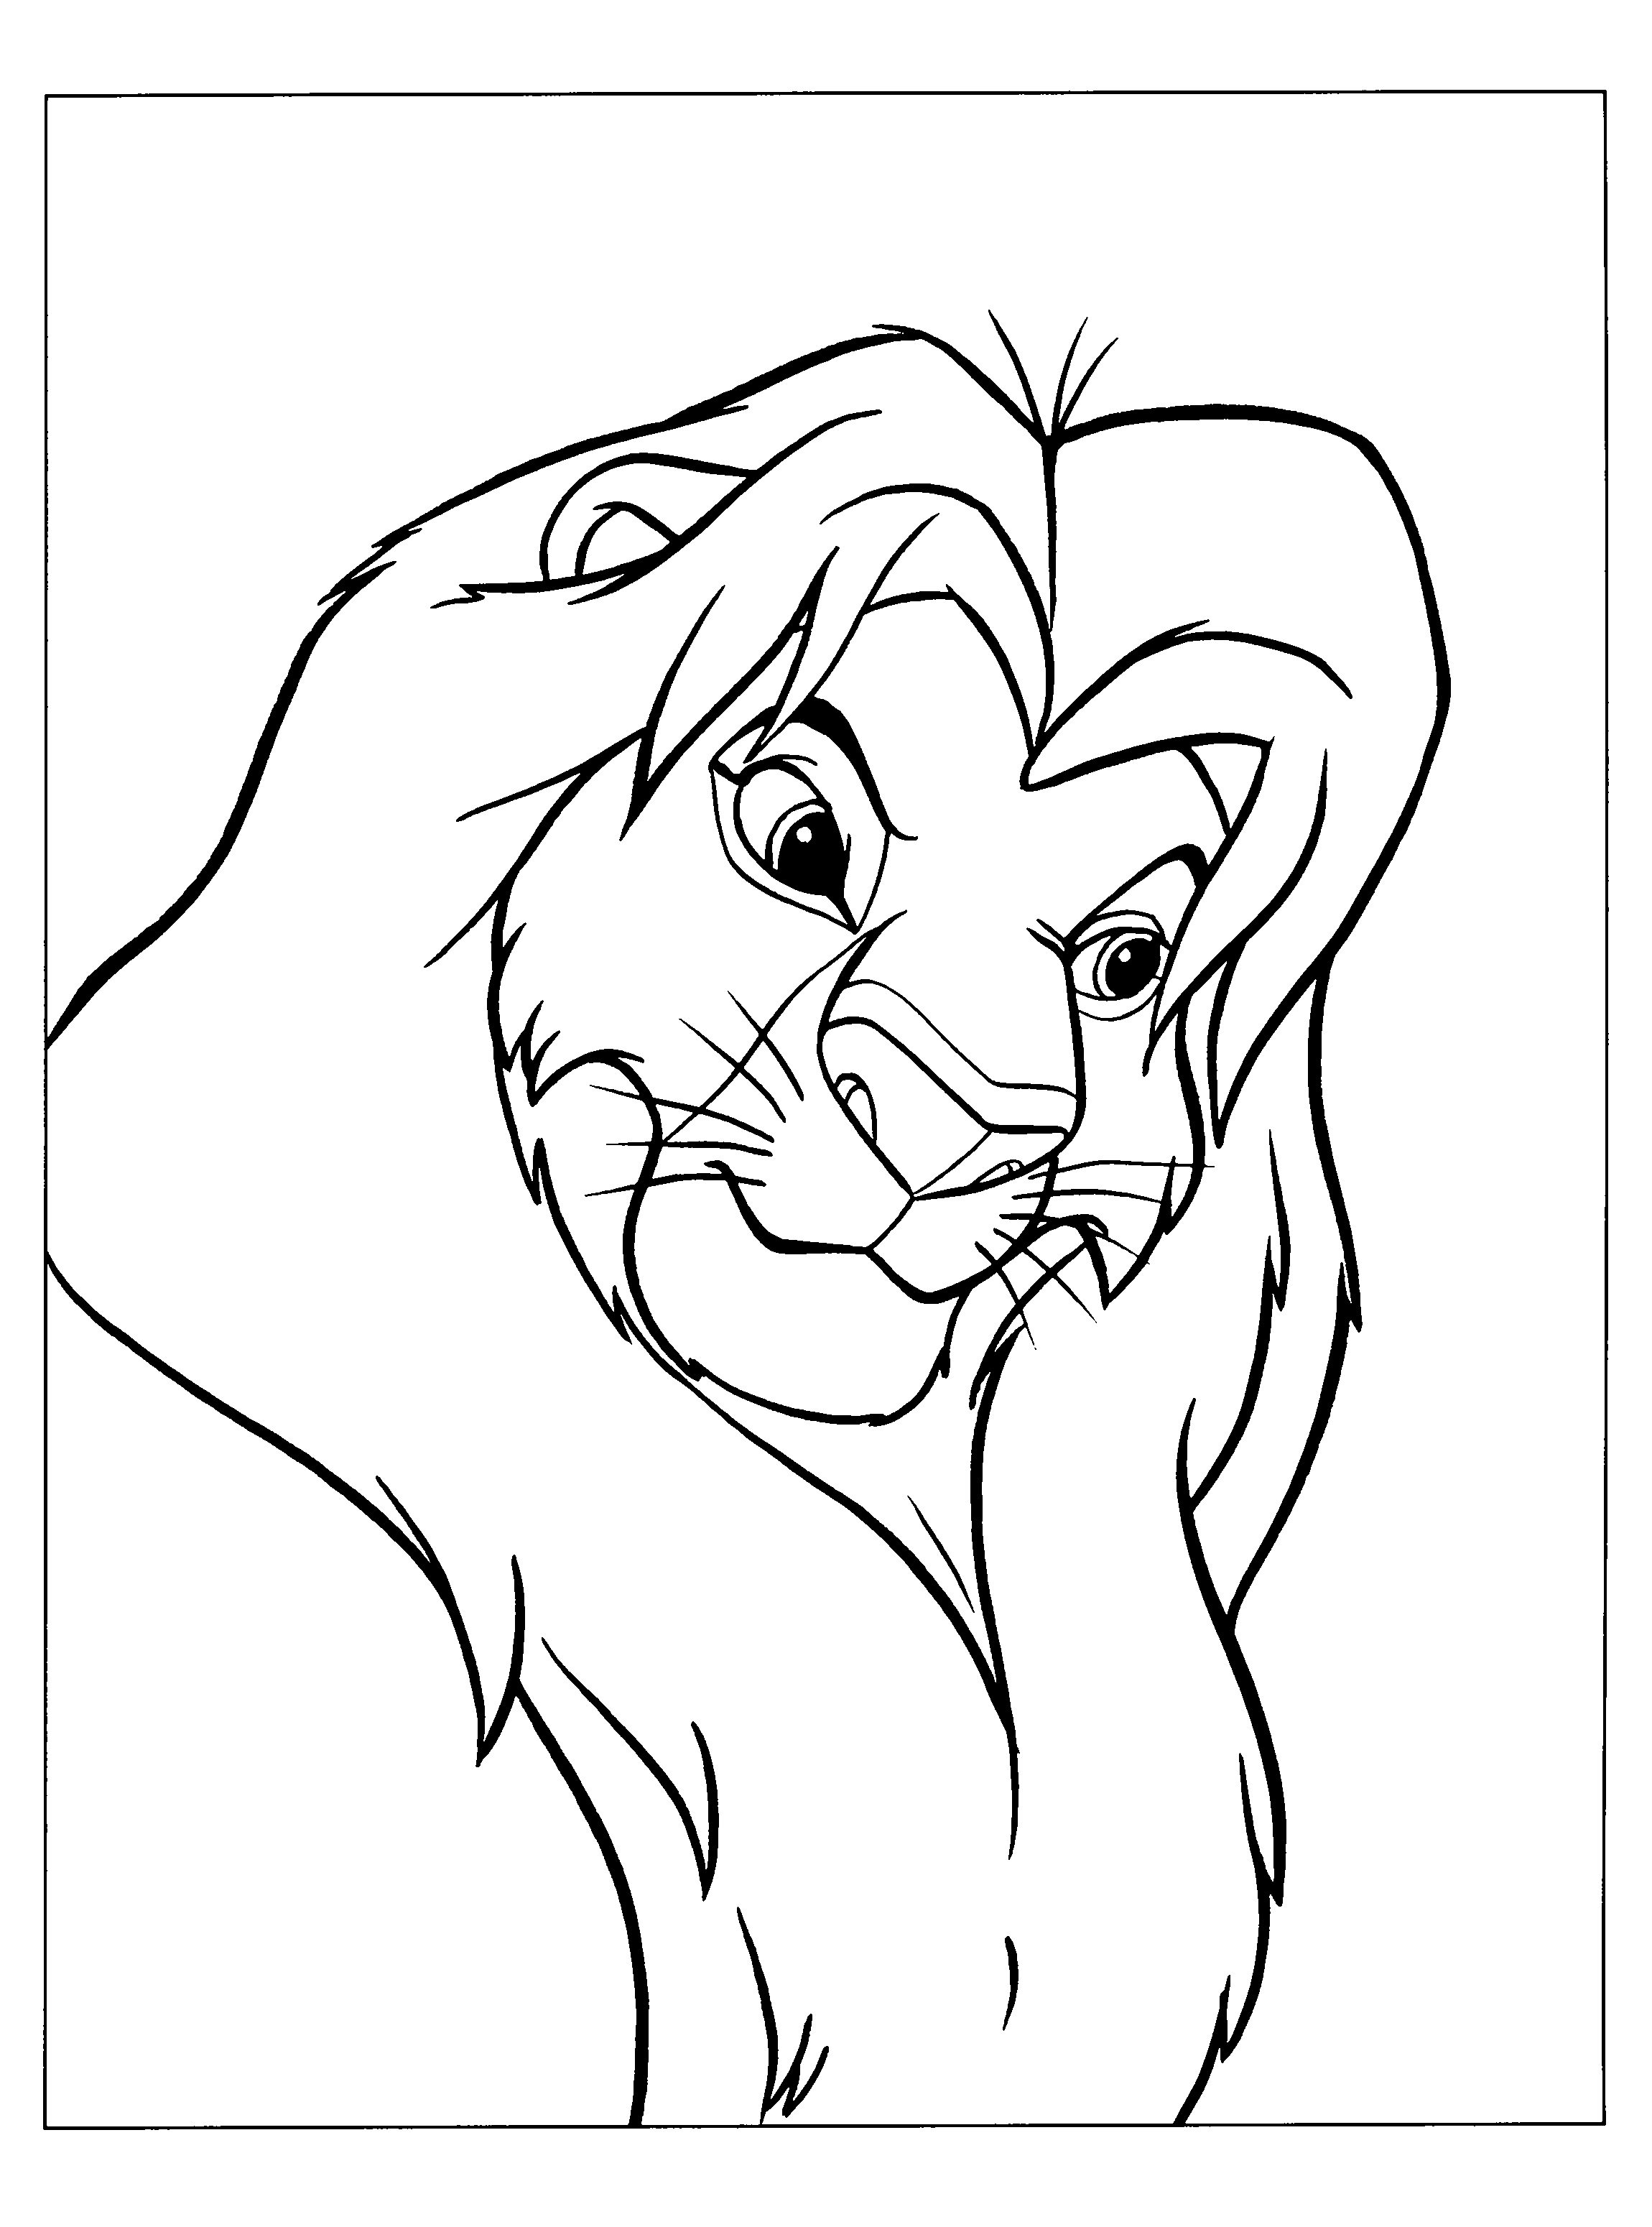 Lion King PNG Black And White - 148454